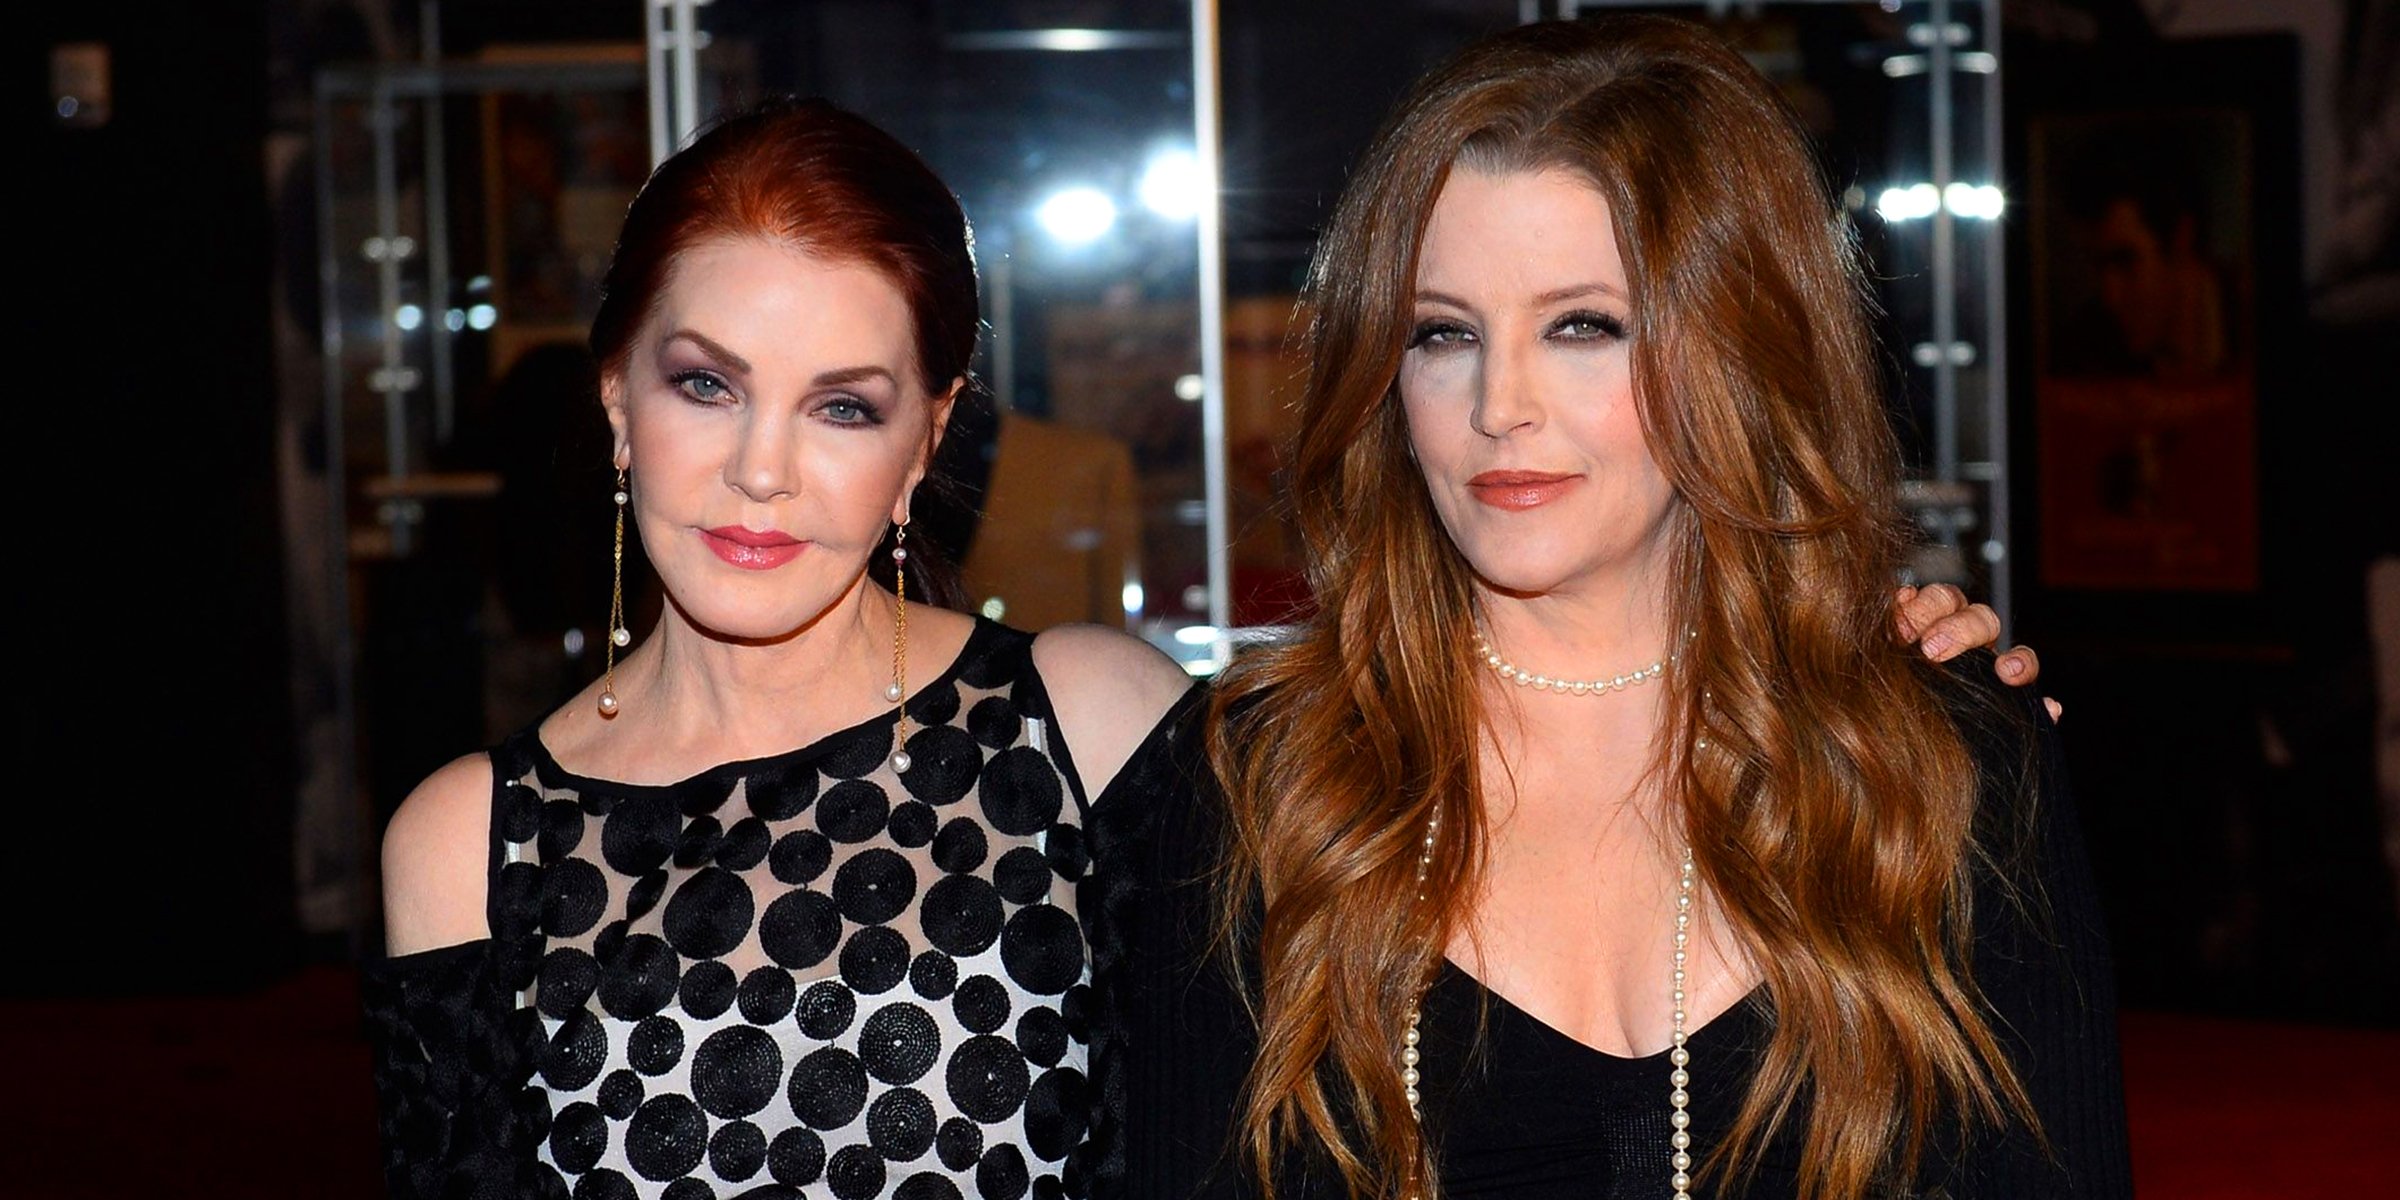 Priscilla Presley and Lisa Marie Presley, 2015 | Source: Getty Images